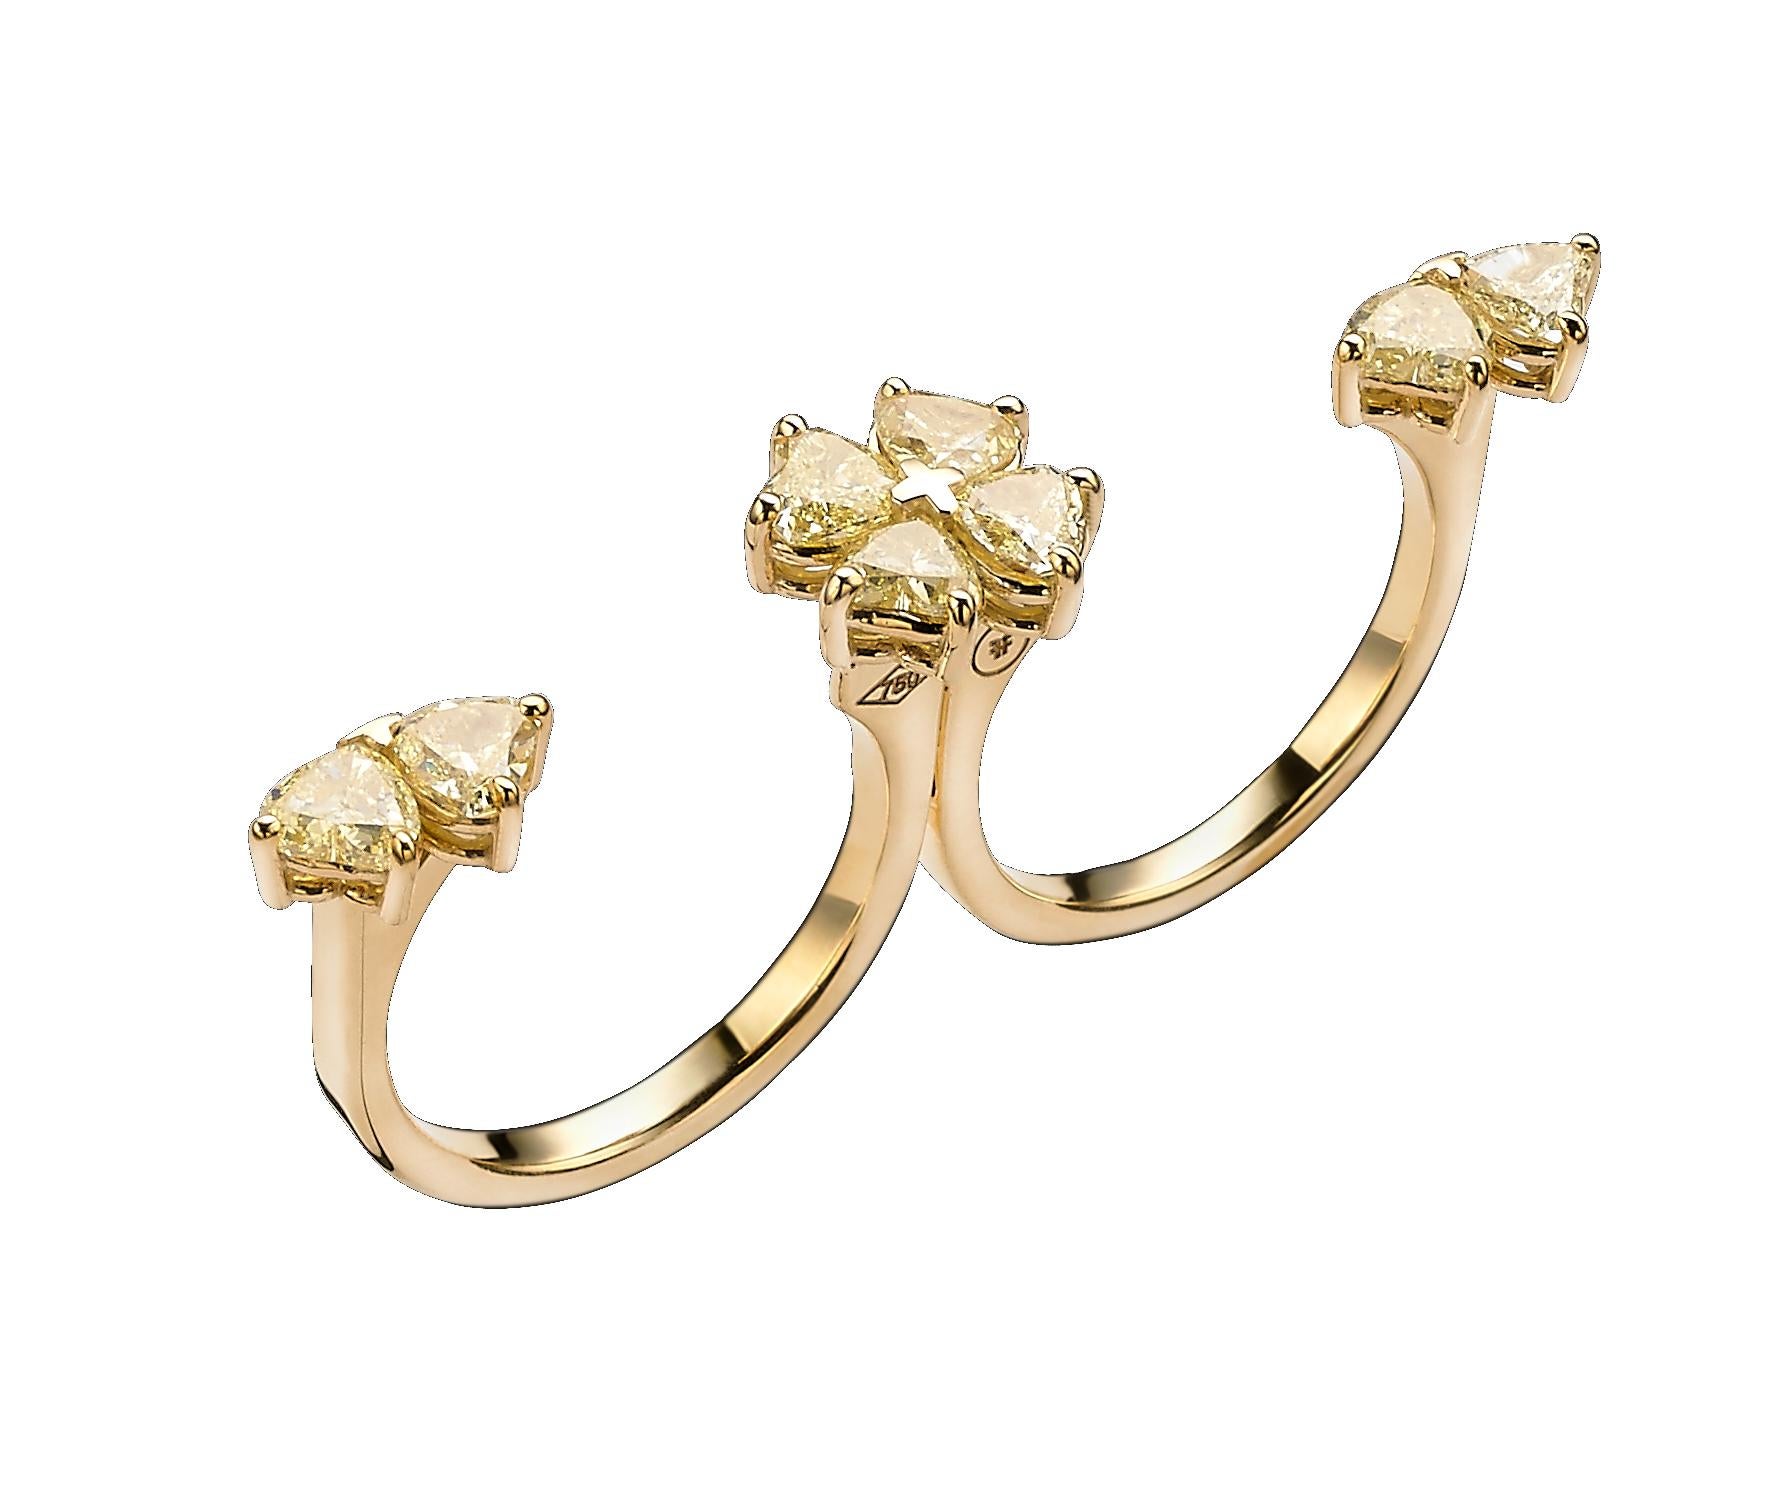 This unique ring can worn in 2 ways: 
- Closed showing 2 flowers made out of 4 heart shaped yellow diamonds each.
- Swiveled open worn on 2 fingers, showing in the center a flower and on each side a butterfly.
While closed, the ring is held together